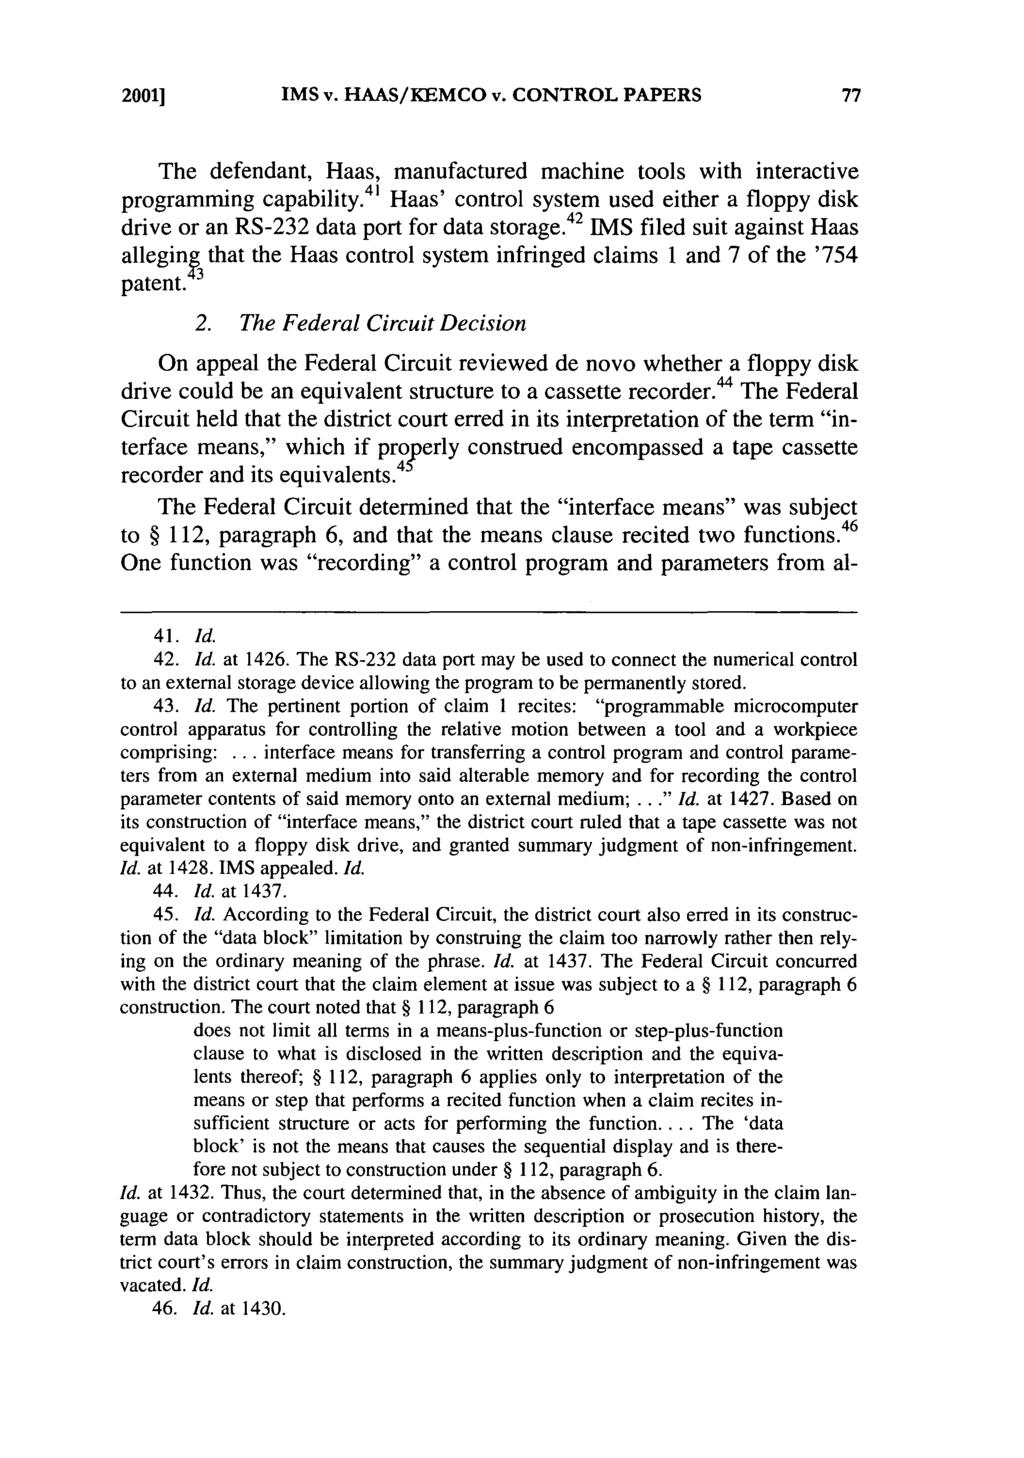 2001] IMS v. HAAS/KEMCO v. CONTROL PAPERS The defendant, Haas, manufactured machine tools with interactive programming capability.